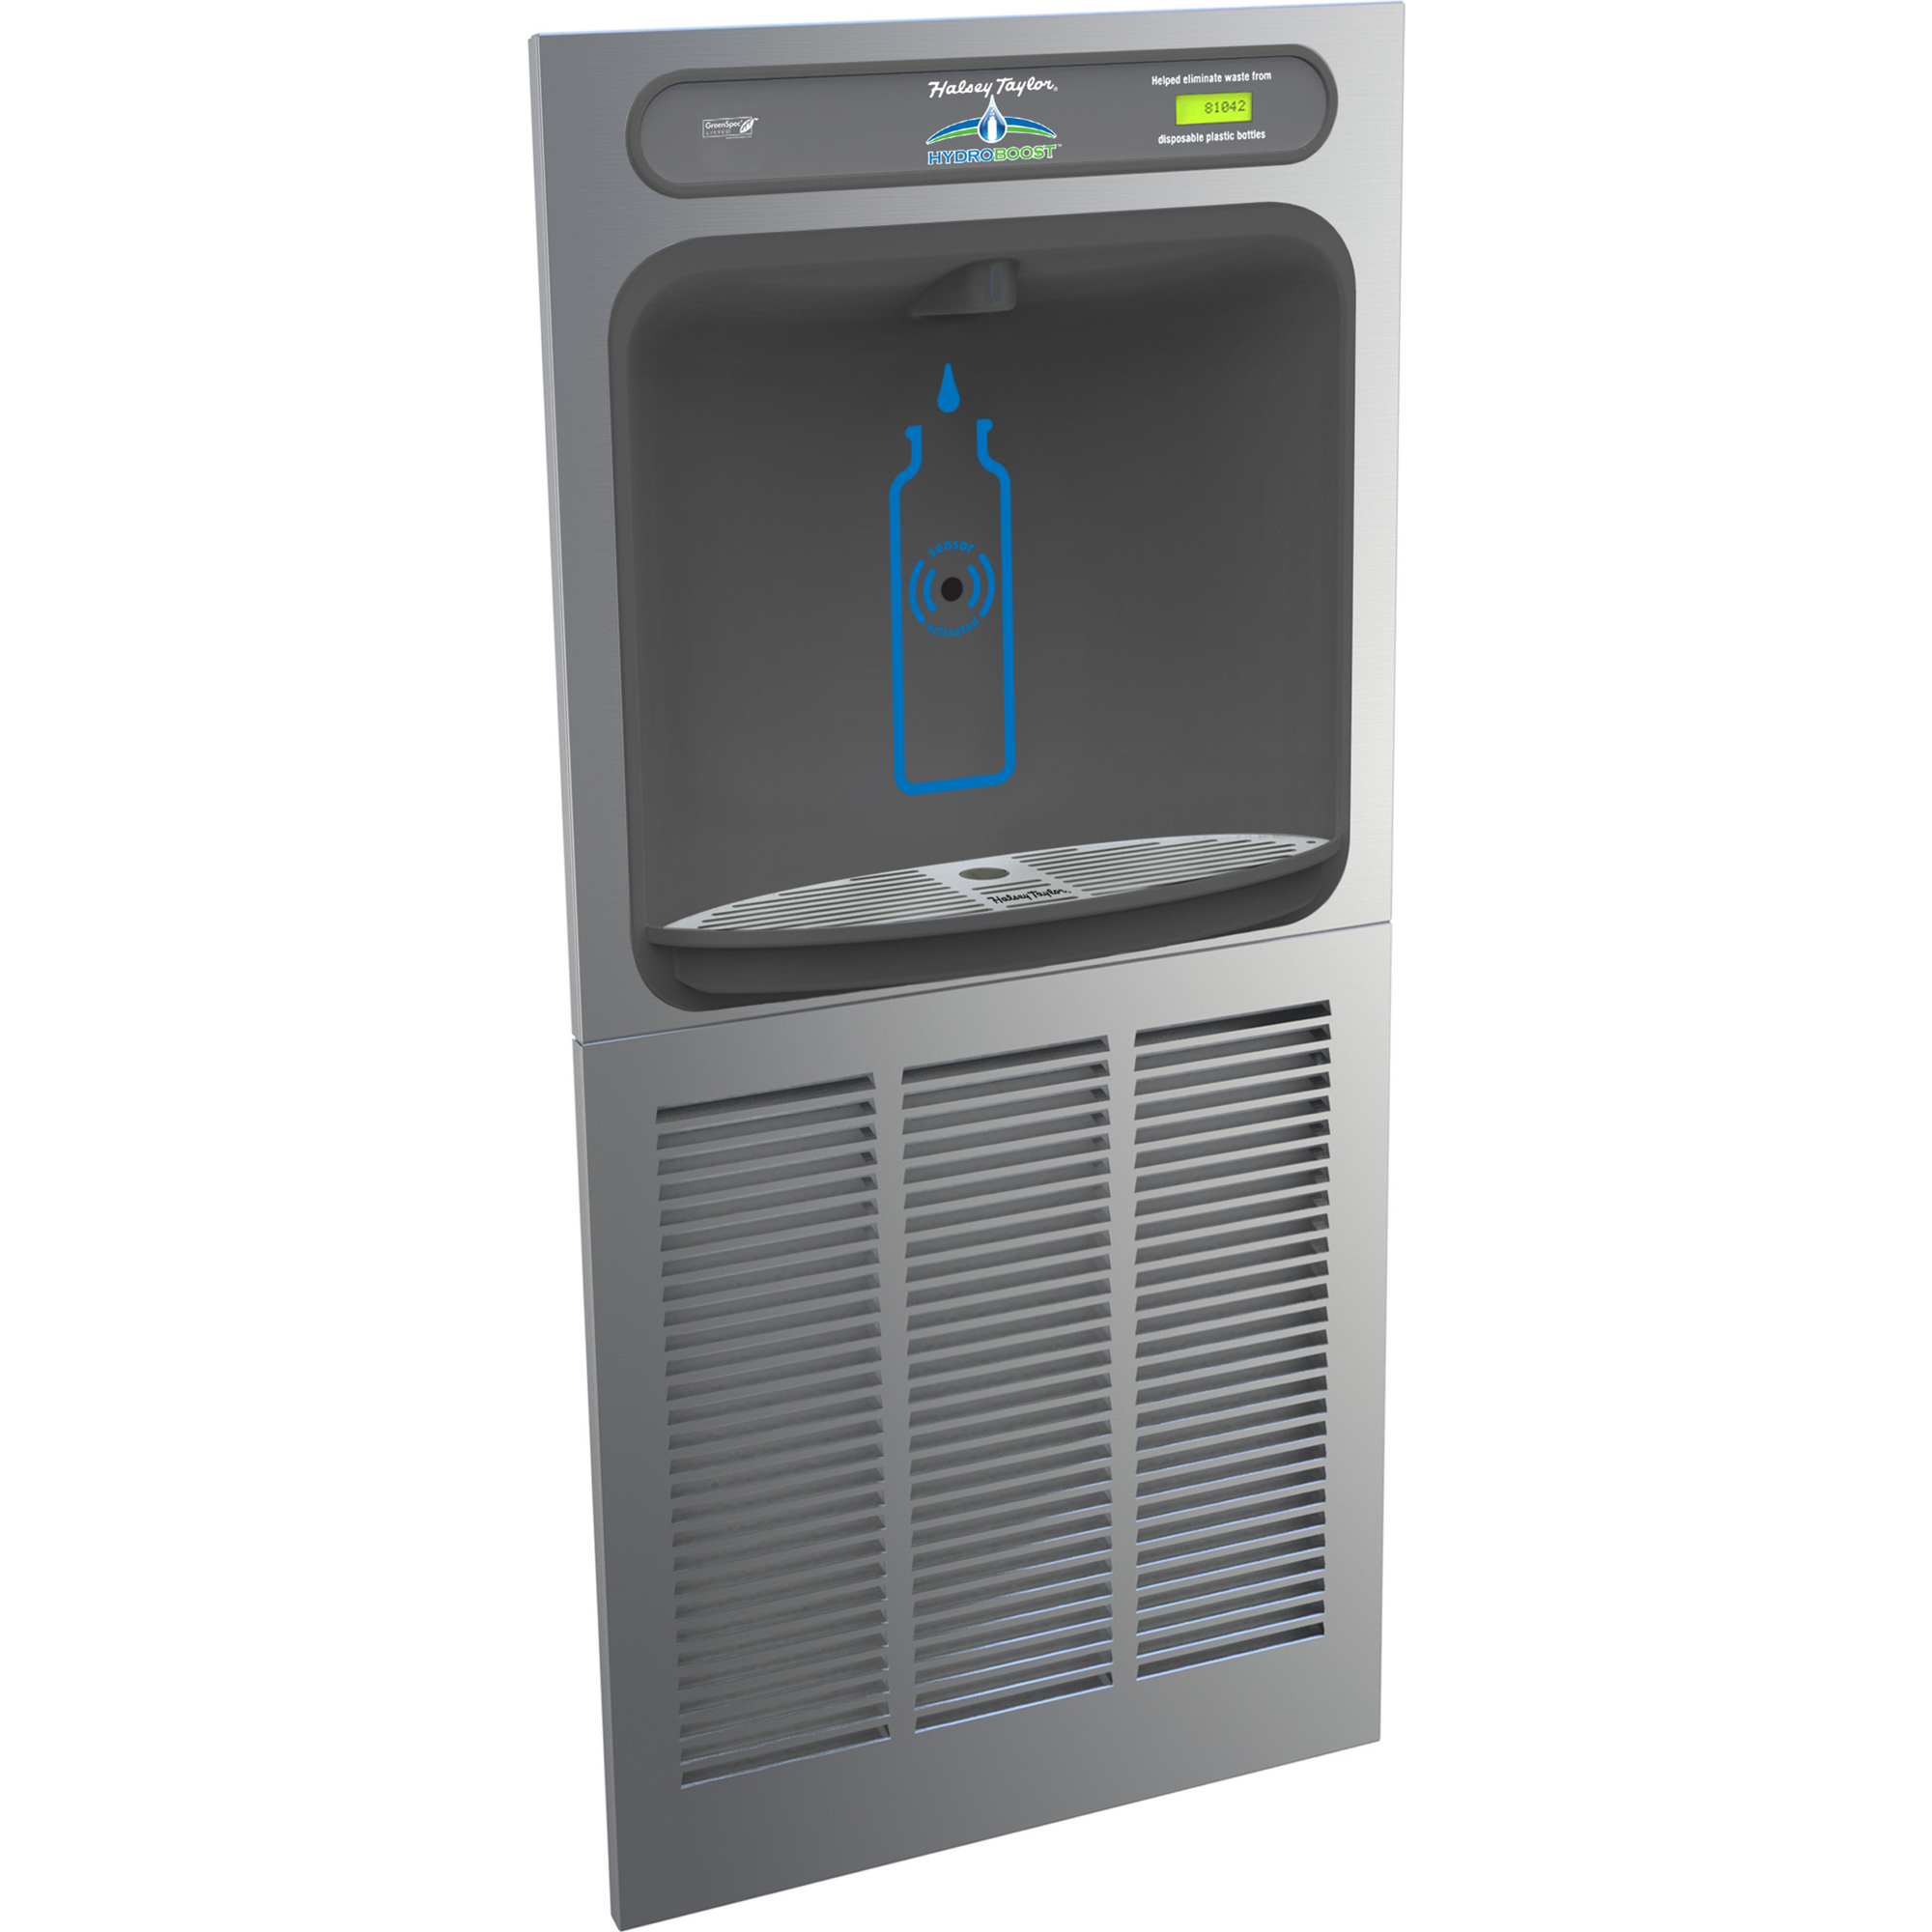 Halsey Taylor HTHBGRN8-NF | In-wall Bottle Filler | Filterless, High-efficiency chiller, Hands-free (comes with Mounting Frame)